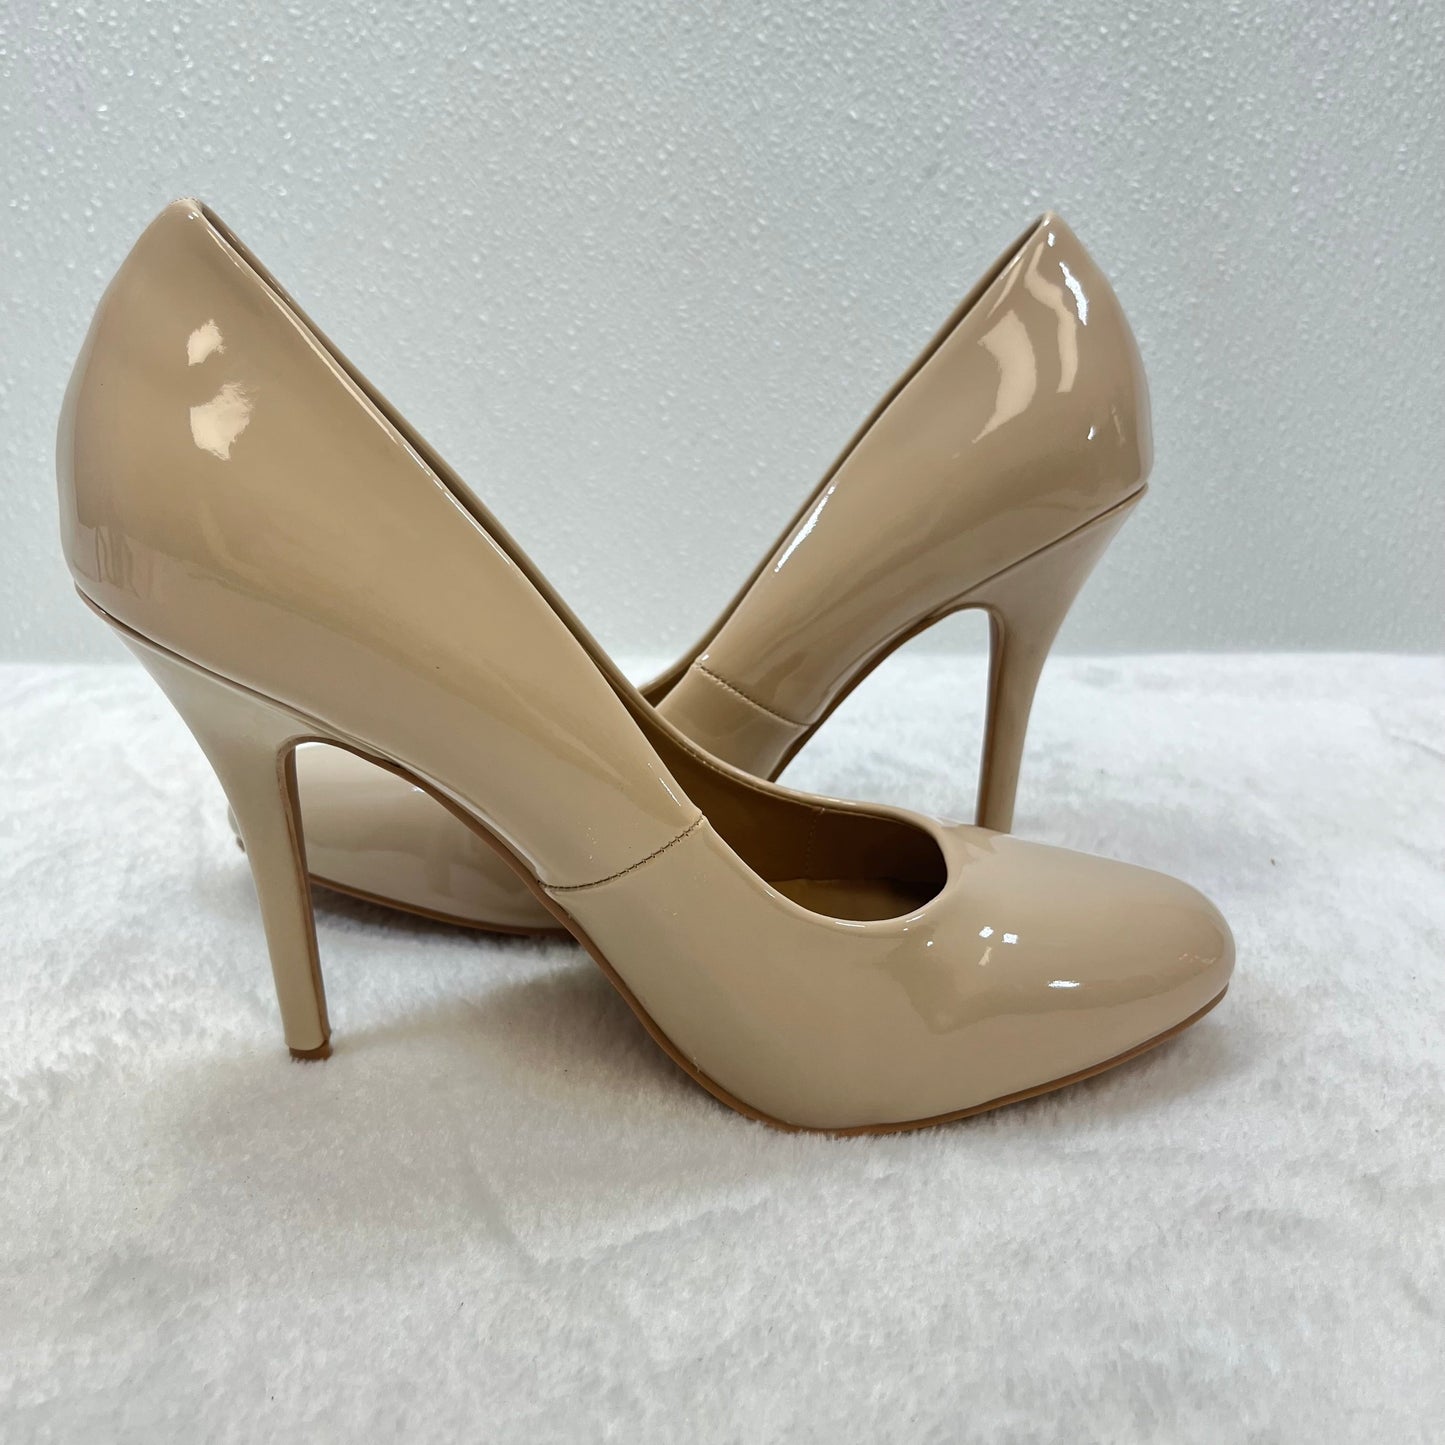 Shoes Heels Stiletto By Cme  Size: 8